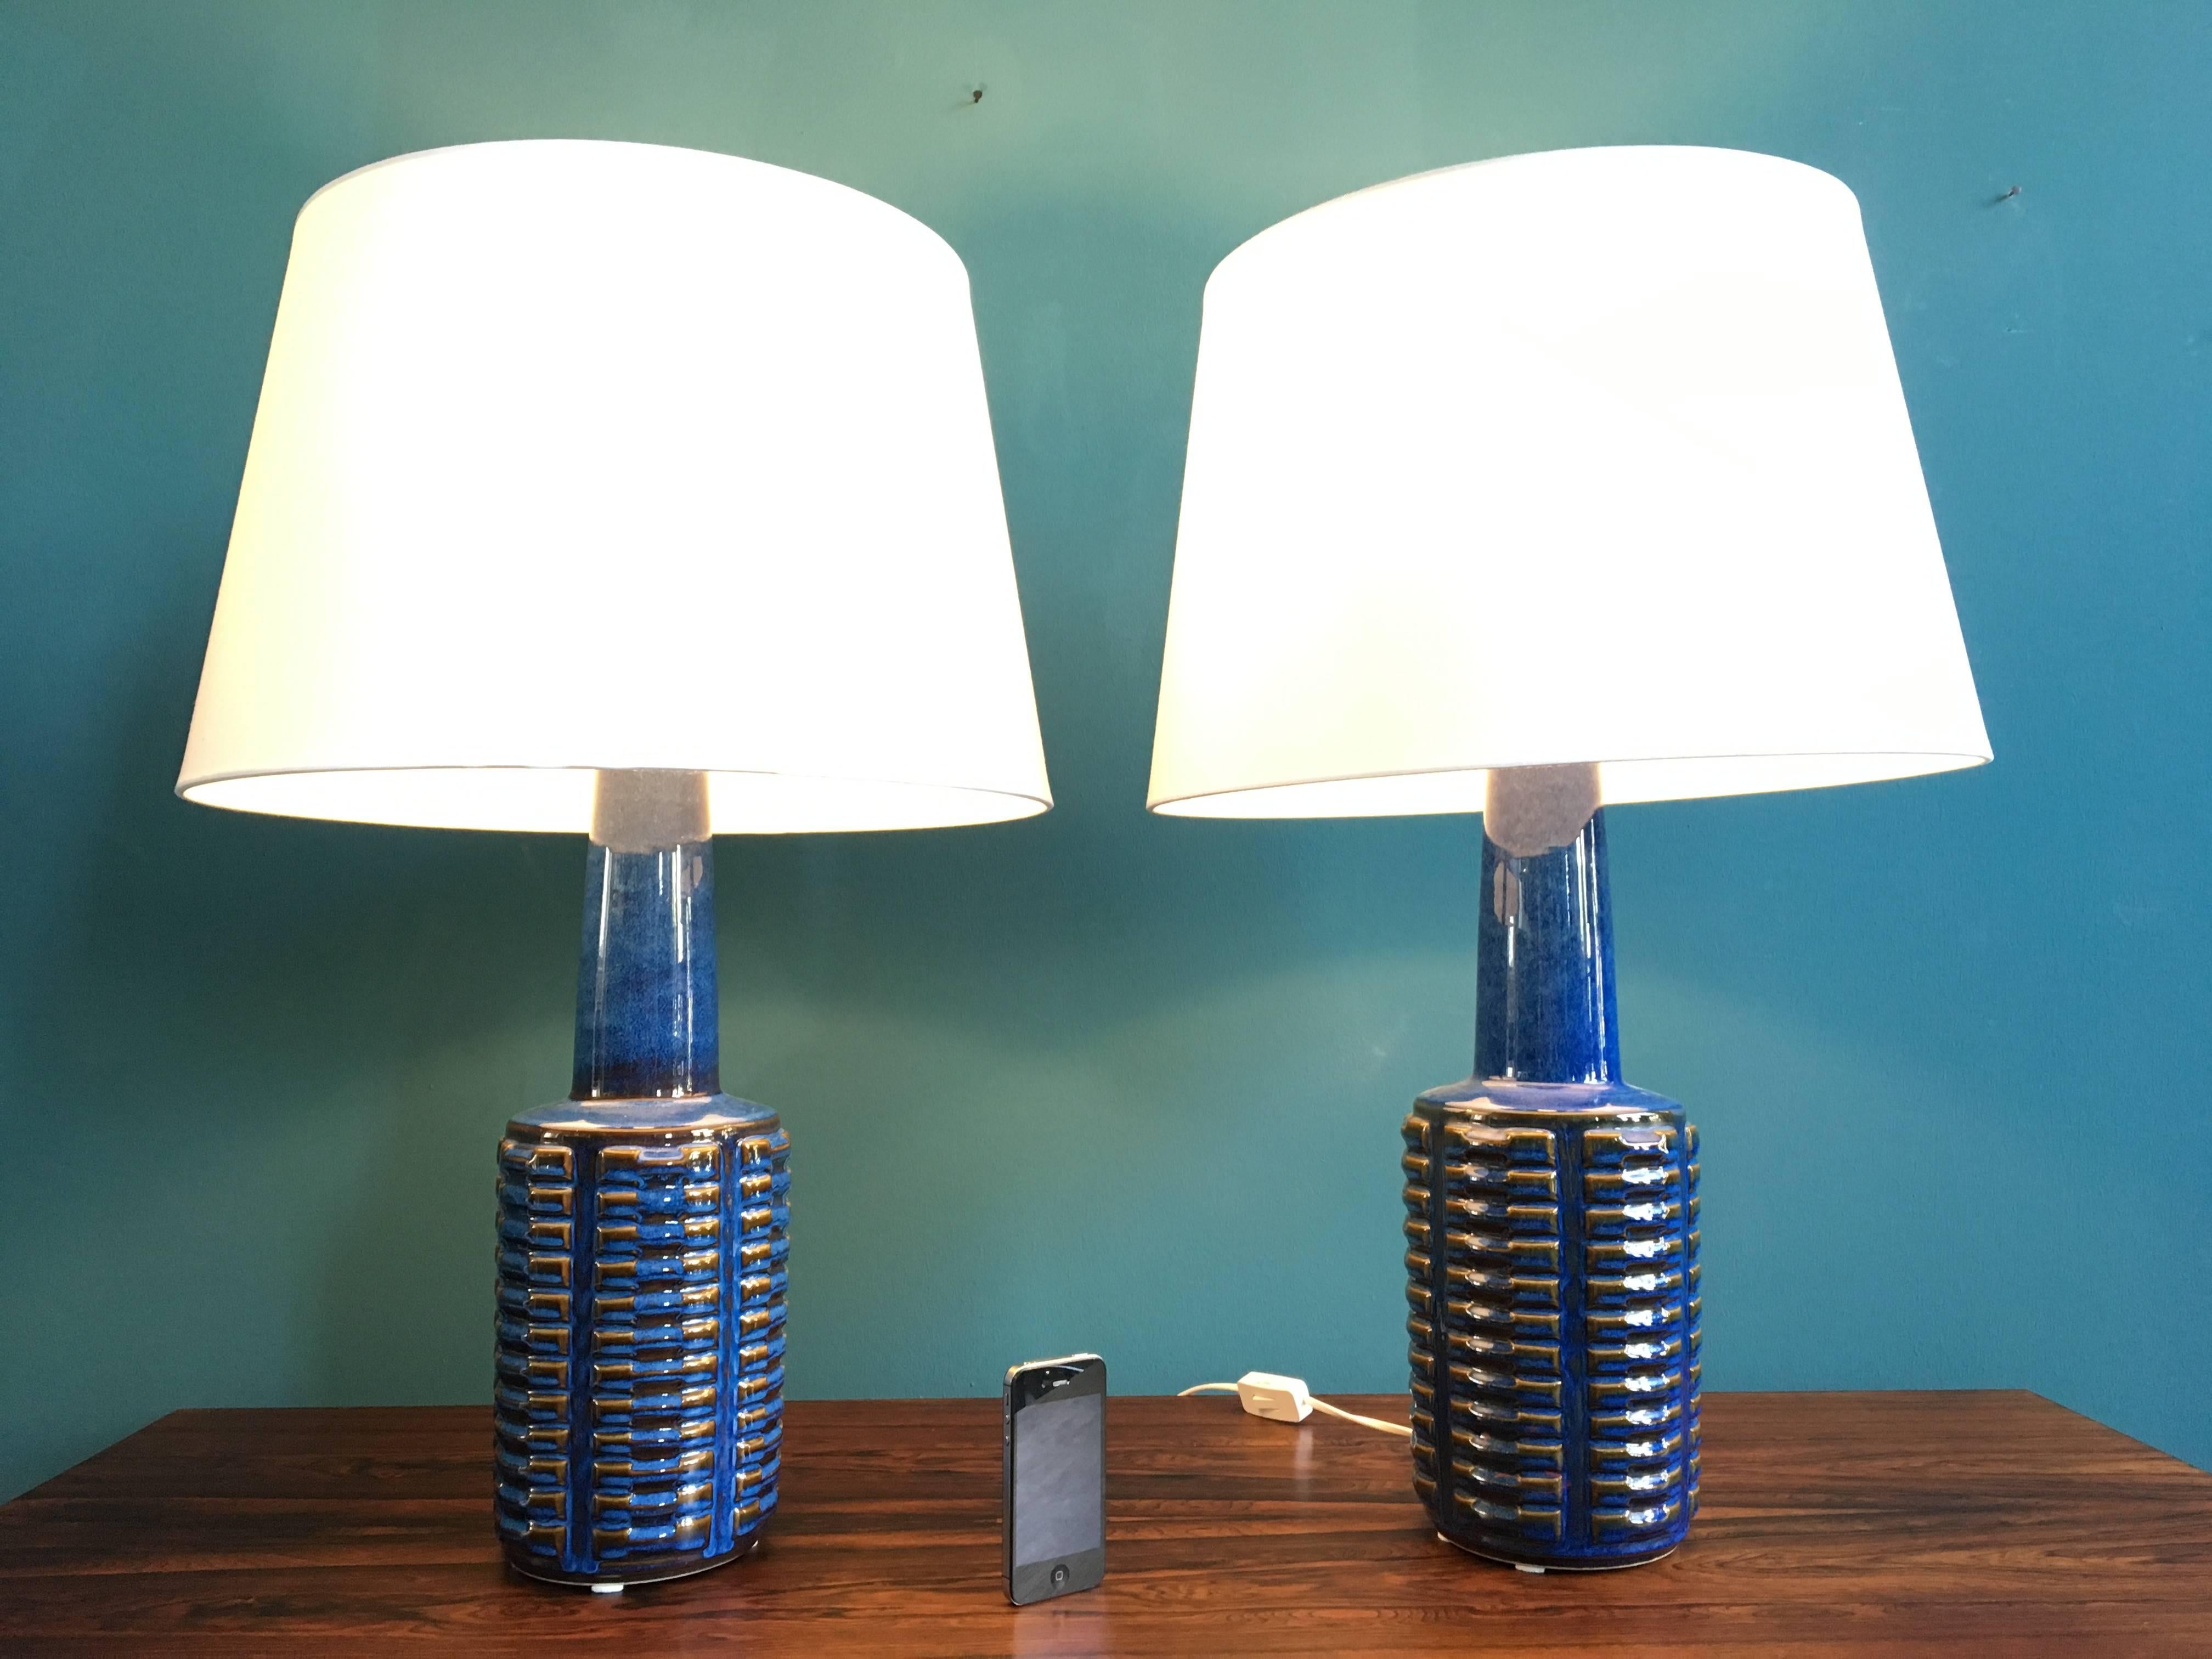 This pair of ceramic table lamps was designed by Einar Johansen and produced by Soholm Stentoj in Denmark in the 1960s. The lamps have been rewired with switches and have new sockets and shades. New European wiring and plugs. 
Søholm was founded in